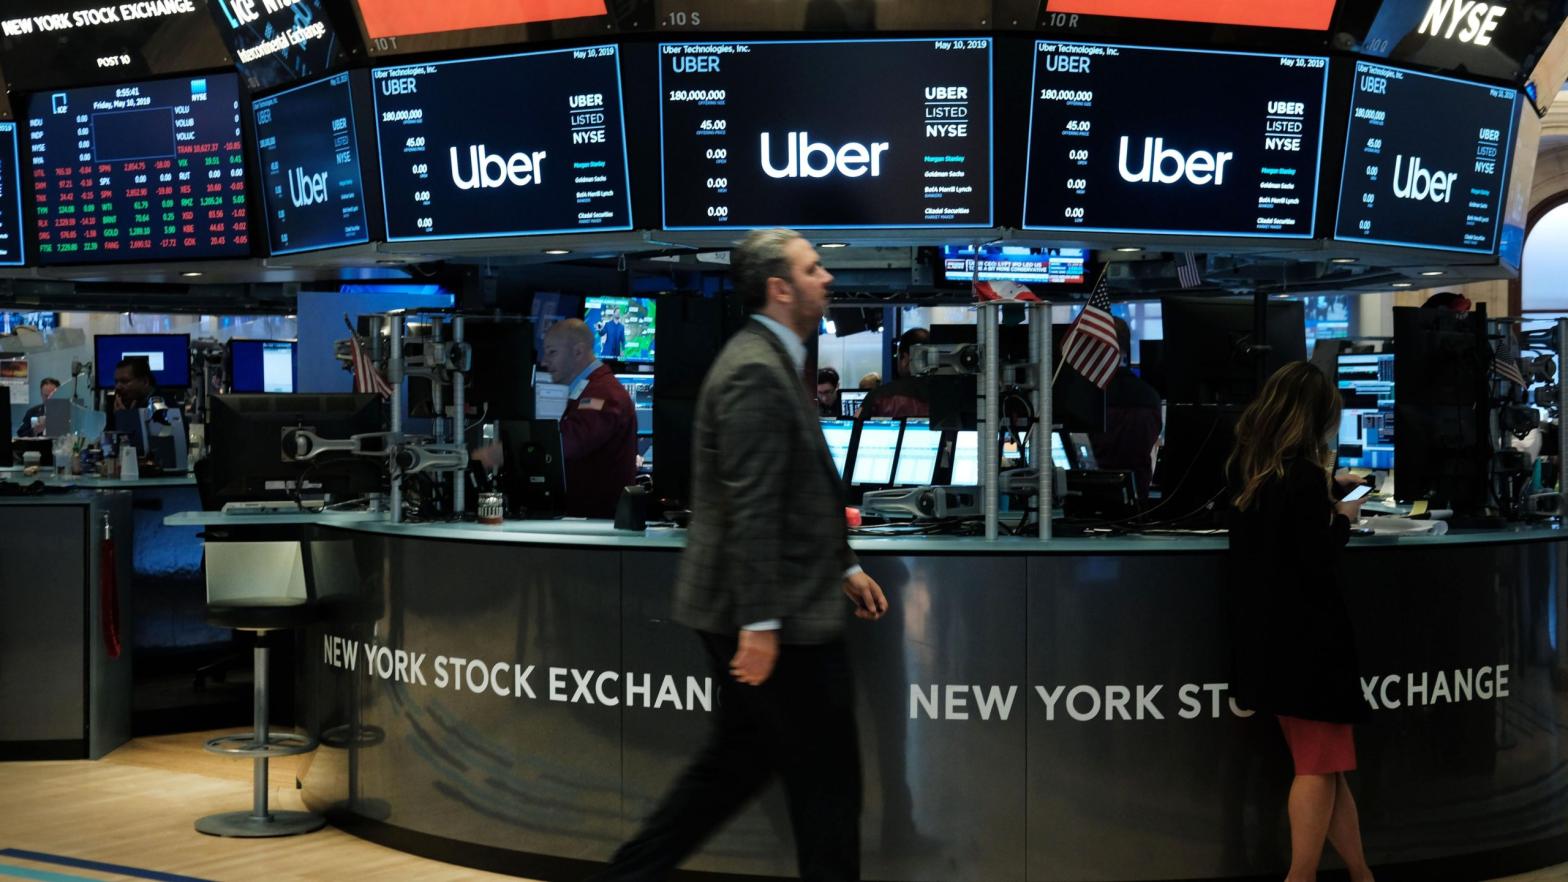 Traders working on the floor at the New York Stock Exchange ahead of Uber's initial public offering in New York City on May 10, 2019. (Photo: Spencer Platt, Getty Images)